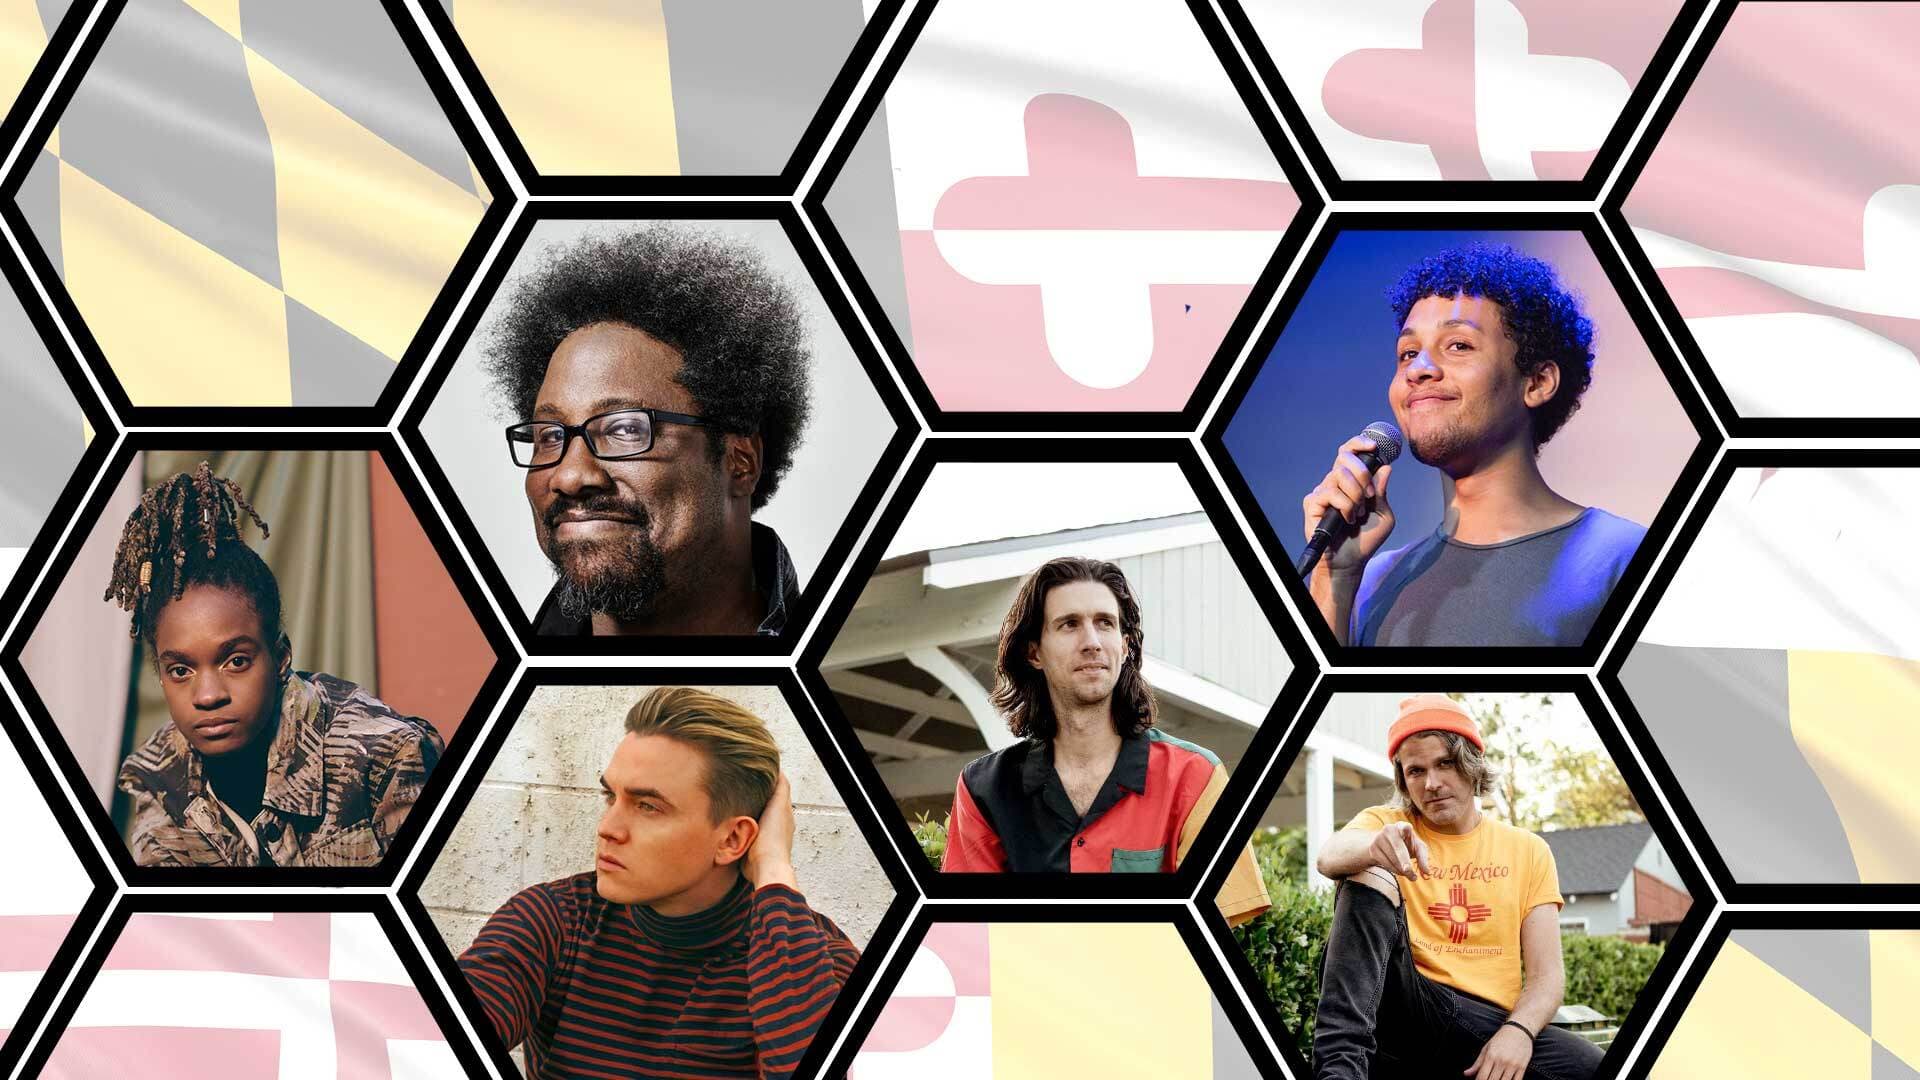 Collage of performers Koffee, W. Kamau Bell, Jesse McCartney, 3OH!3 and Jaboukie Young-White